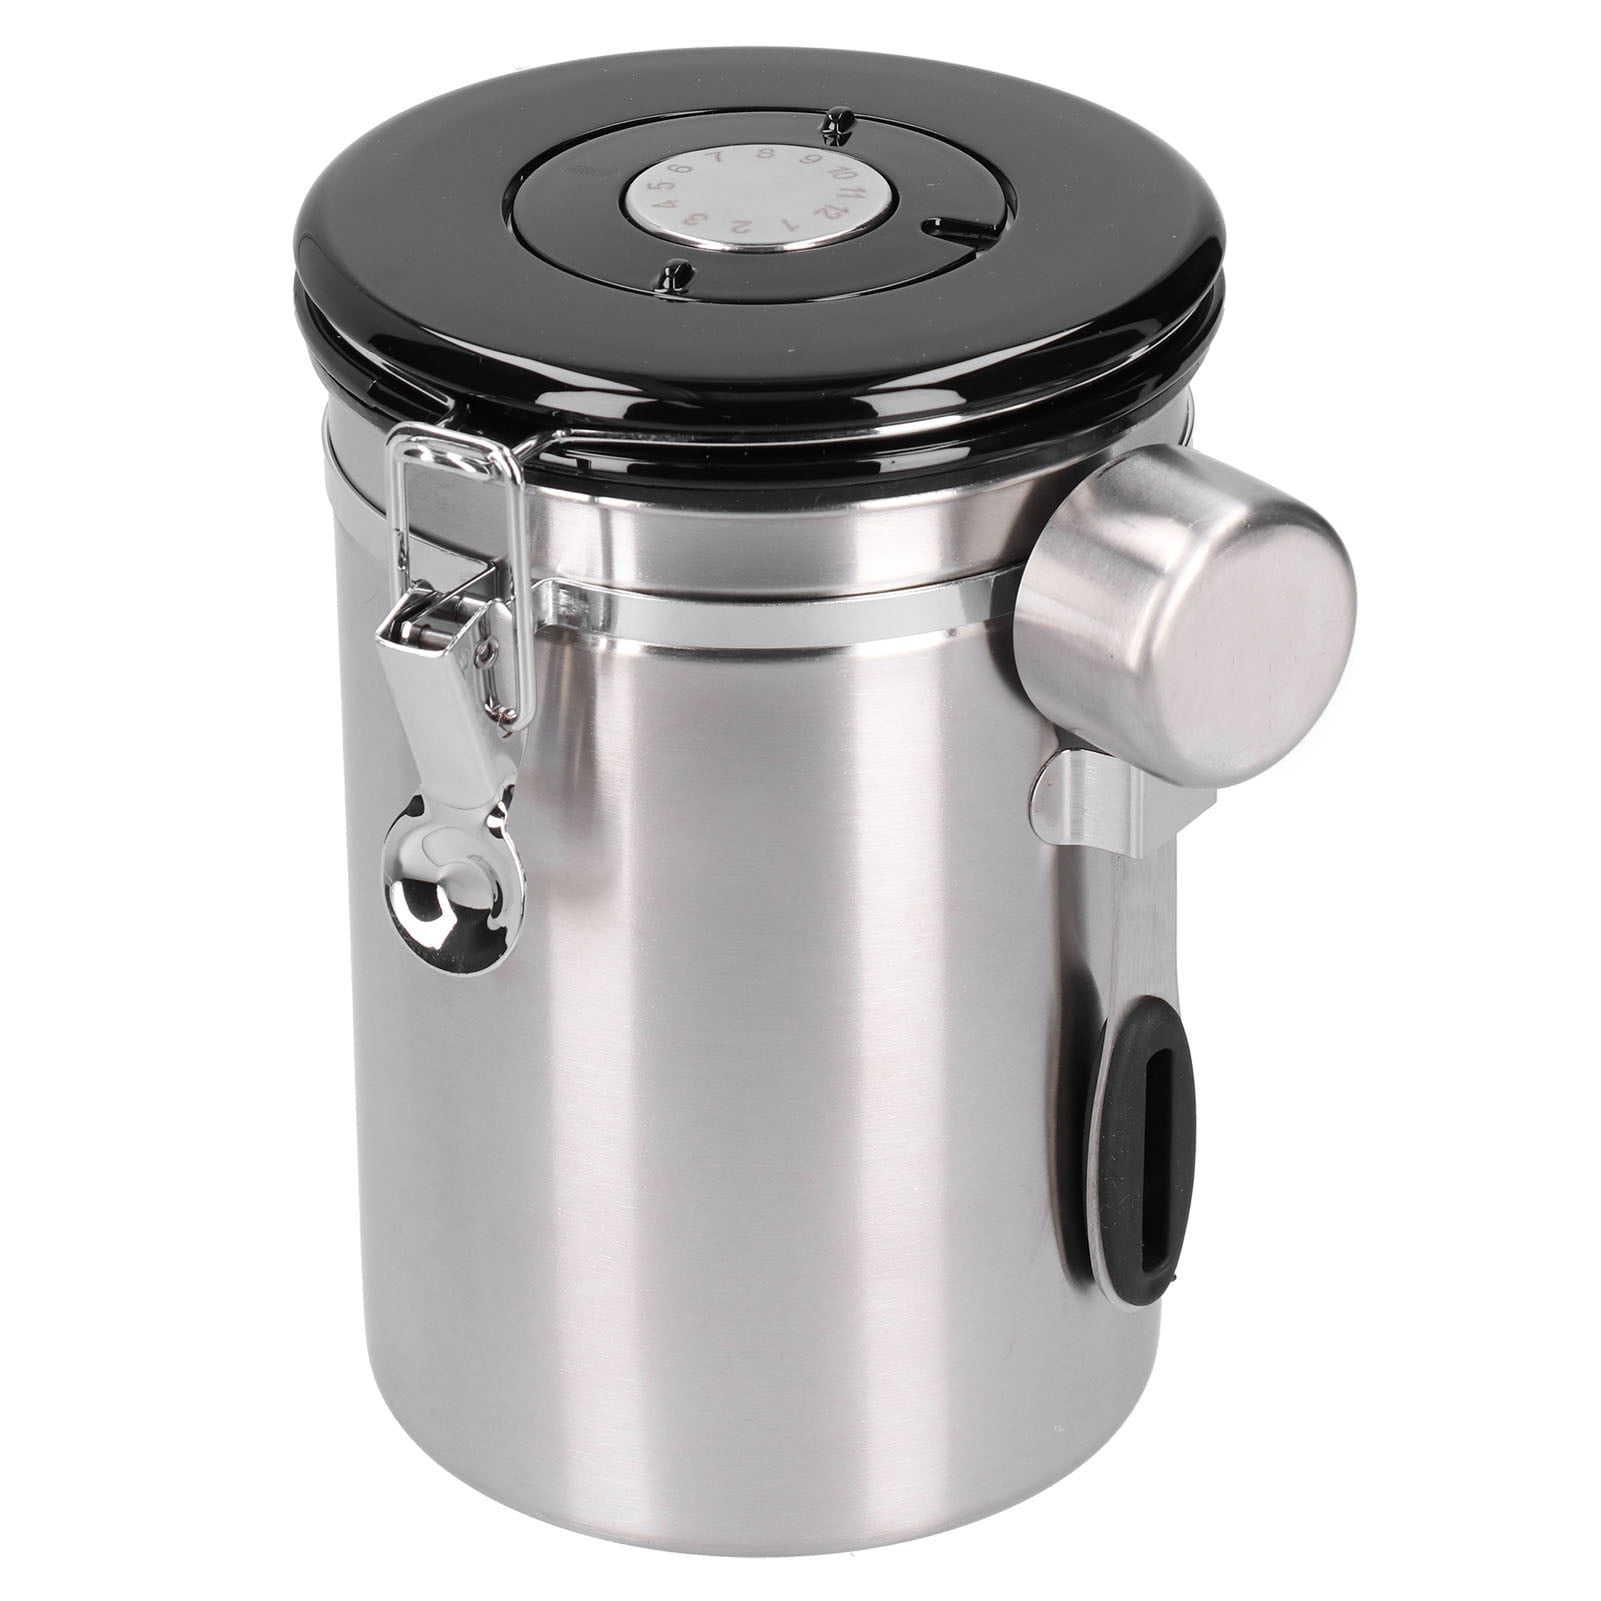 Voorzitter Petulance Fraude DOACT Coffee Bean Container with Exhaust Valve Tea Leaf Storage Canister  for Kitchen Use,Coffee Bean Container,Kitchen Accessory - Walmart.com